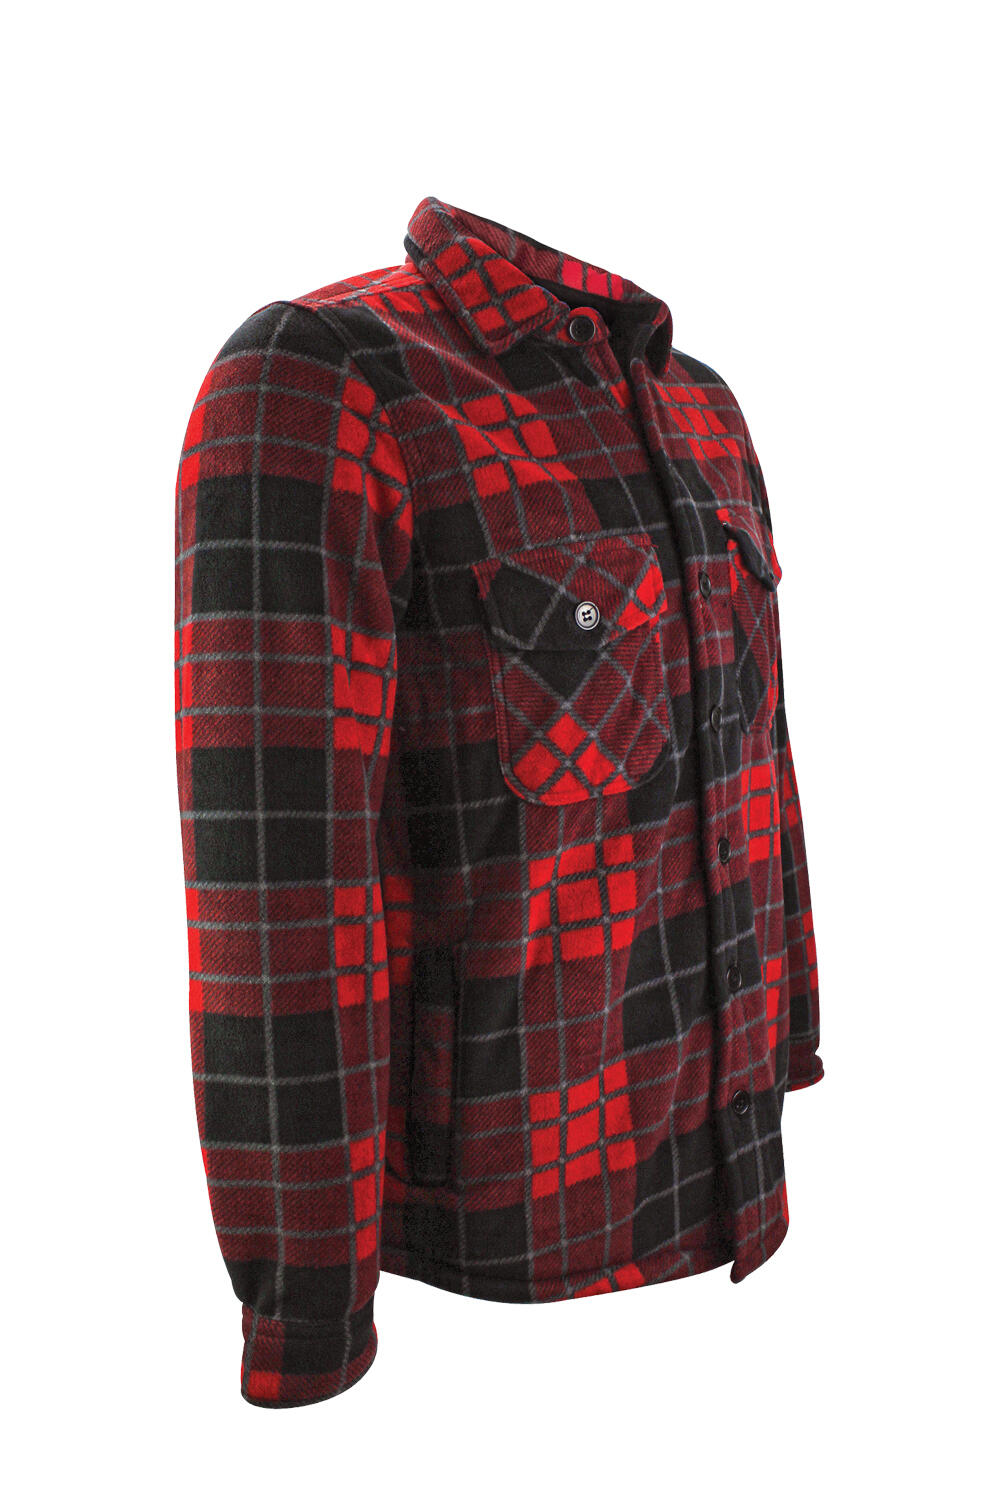 Mens Quilted Plaid Pattern Thermal Warm Long Sleeve Winter Jacket 2/4